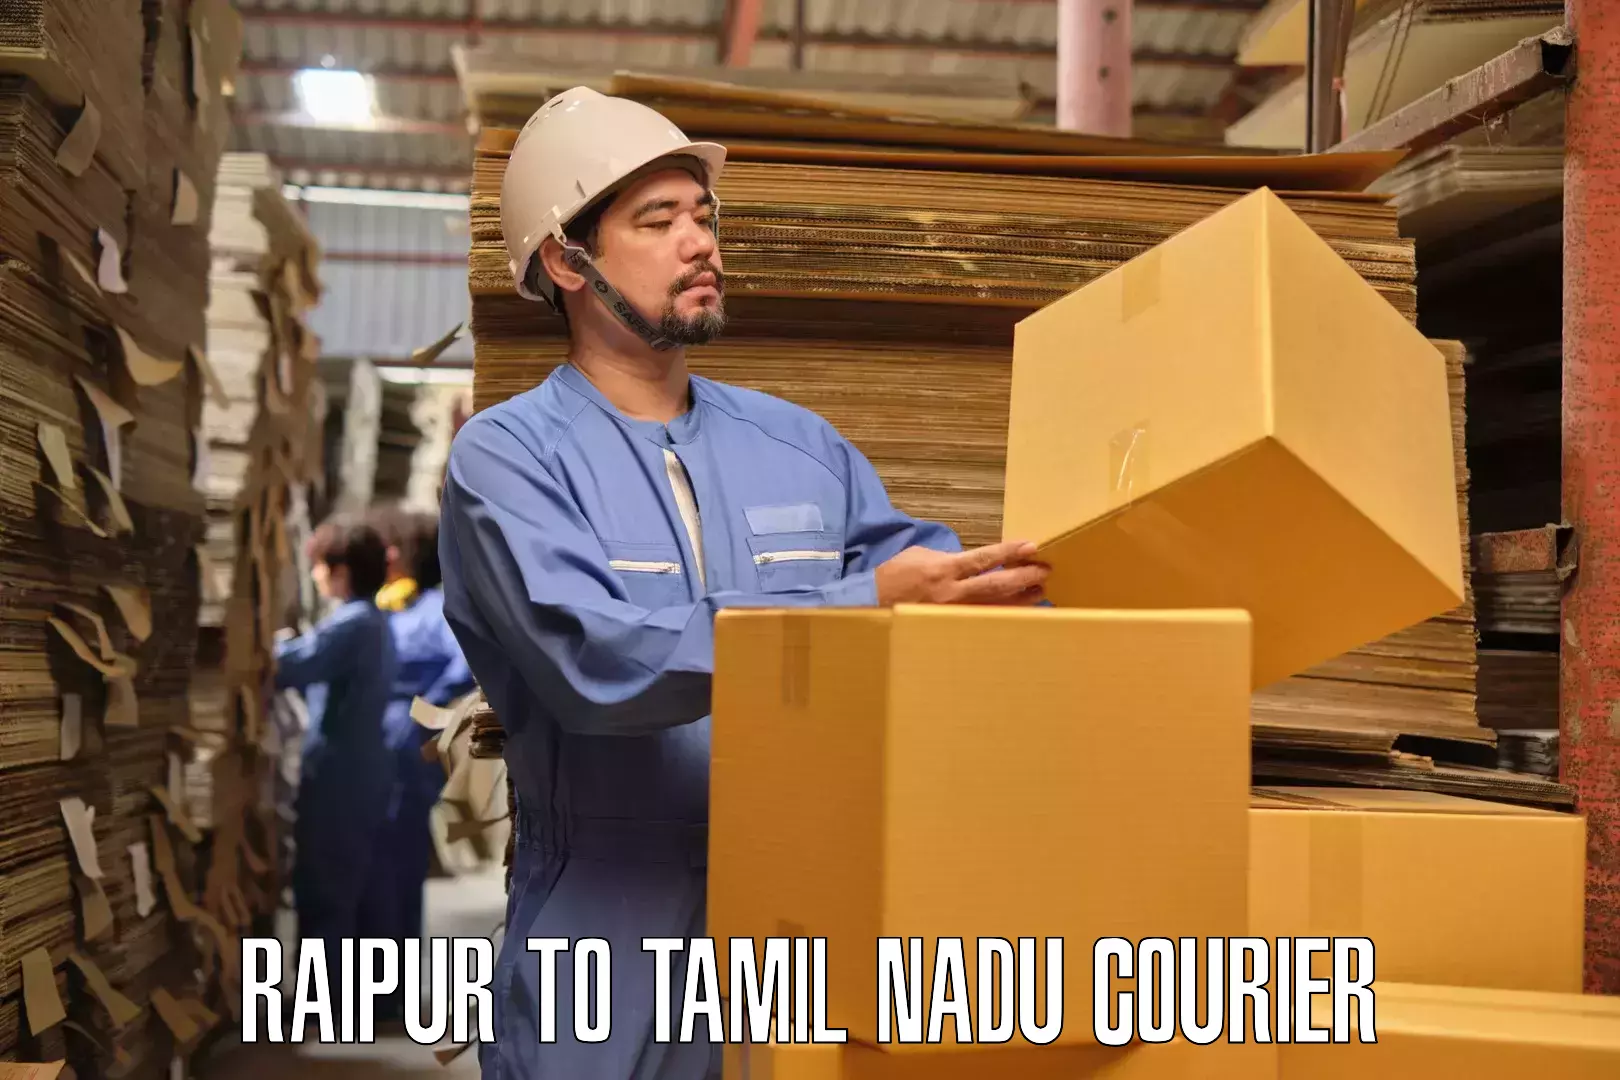 Furniture delivery service Raipur to Avadi